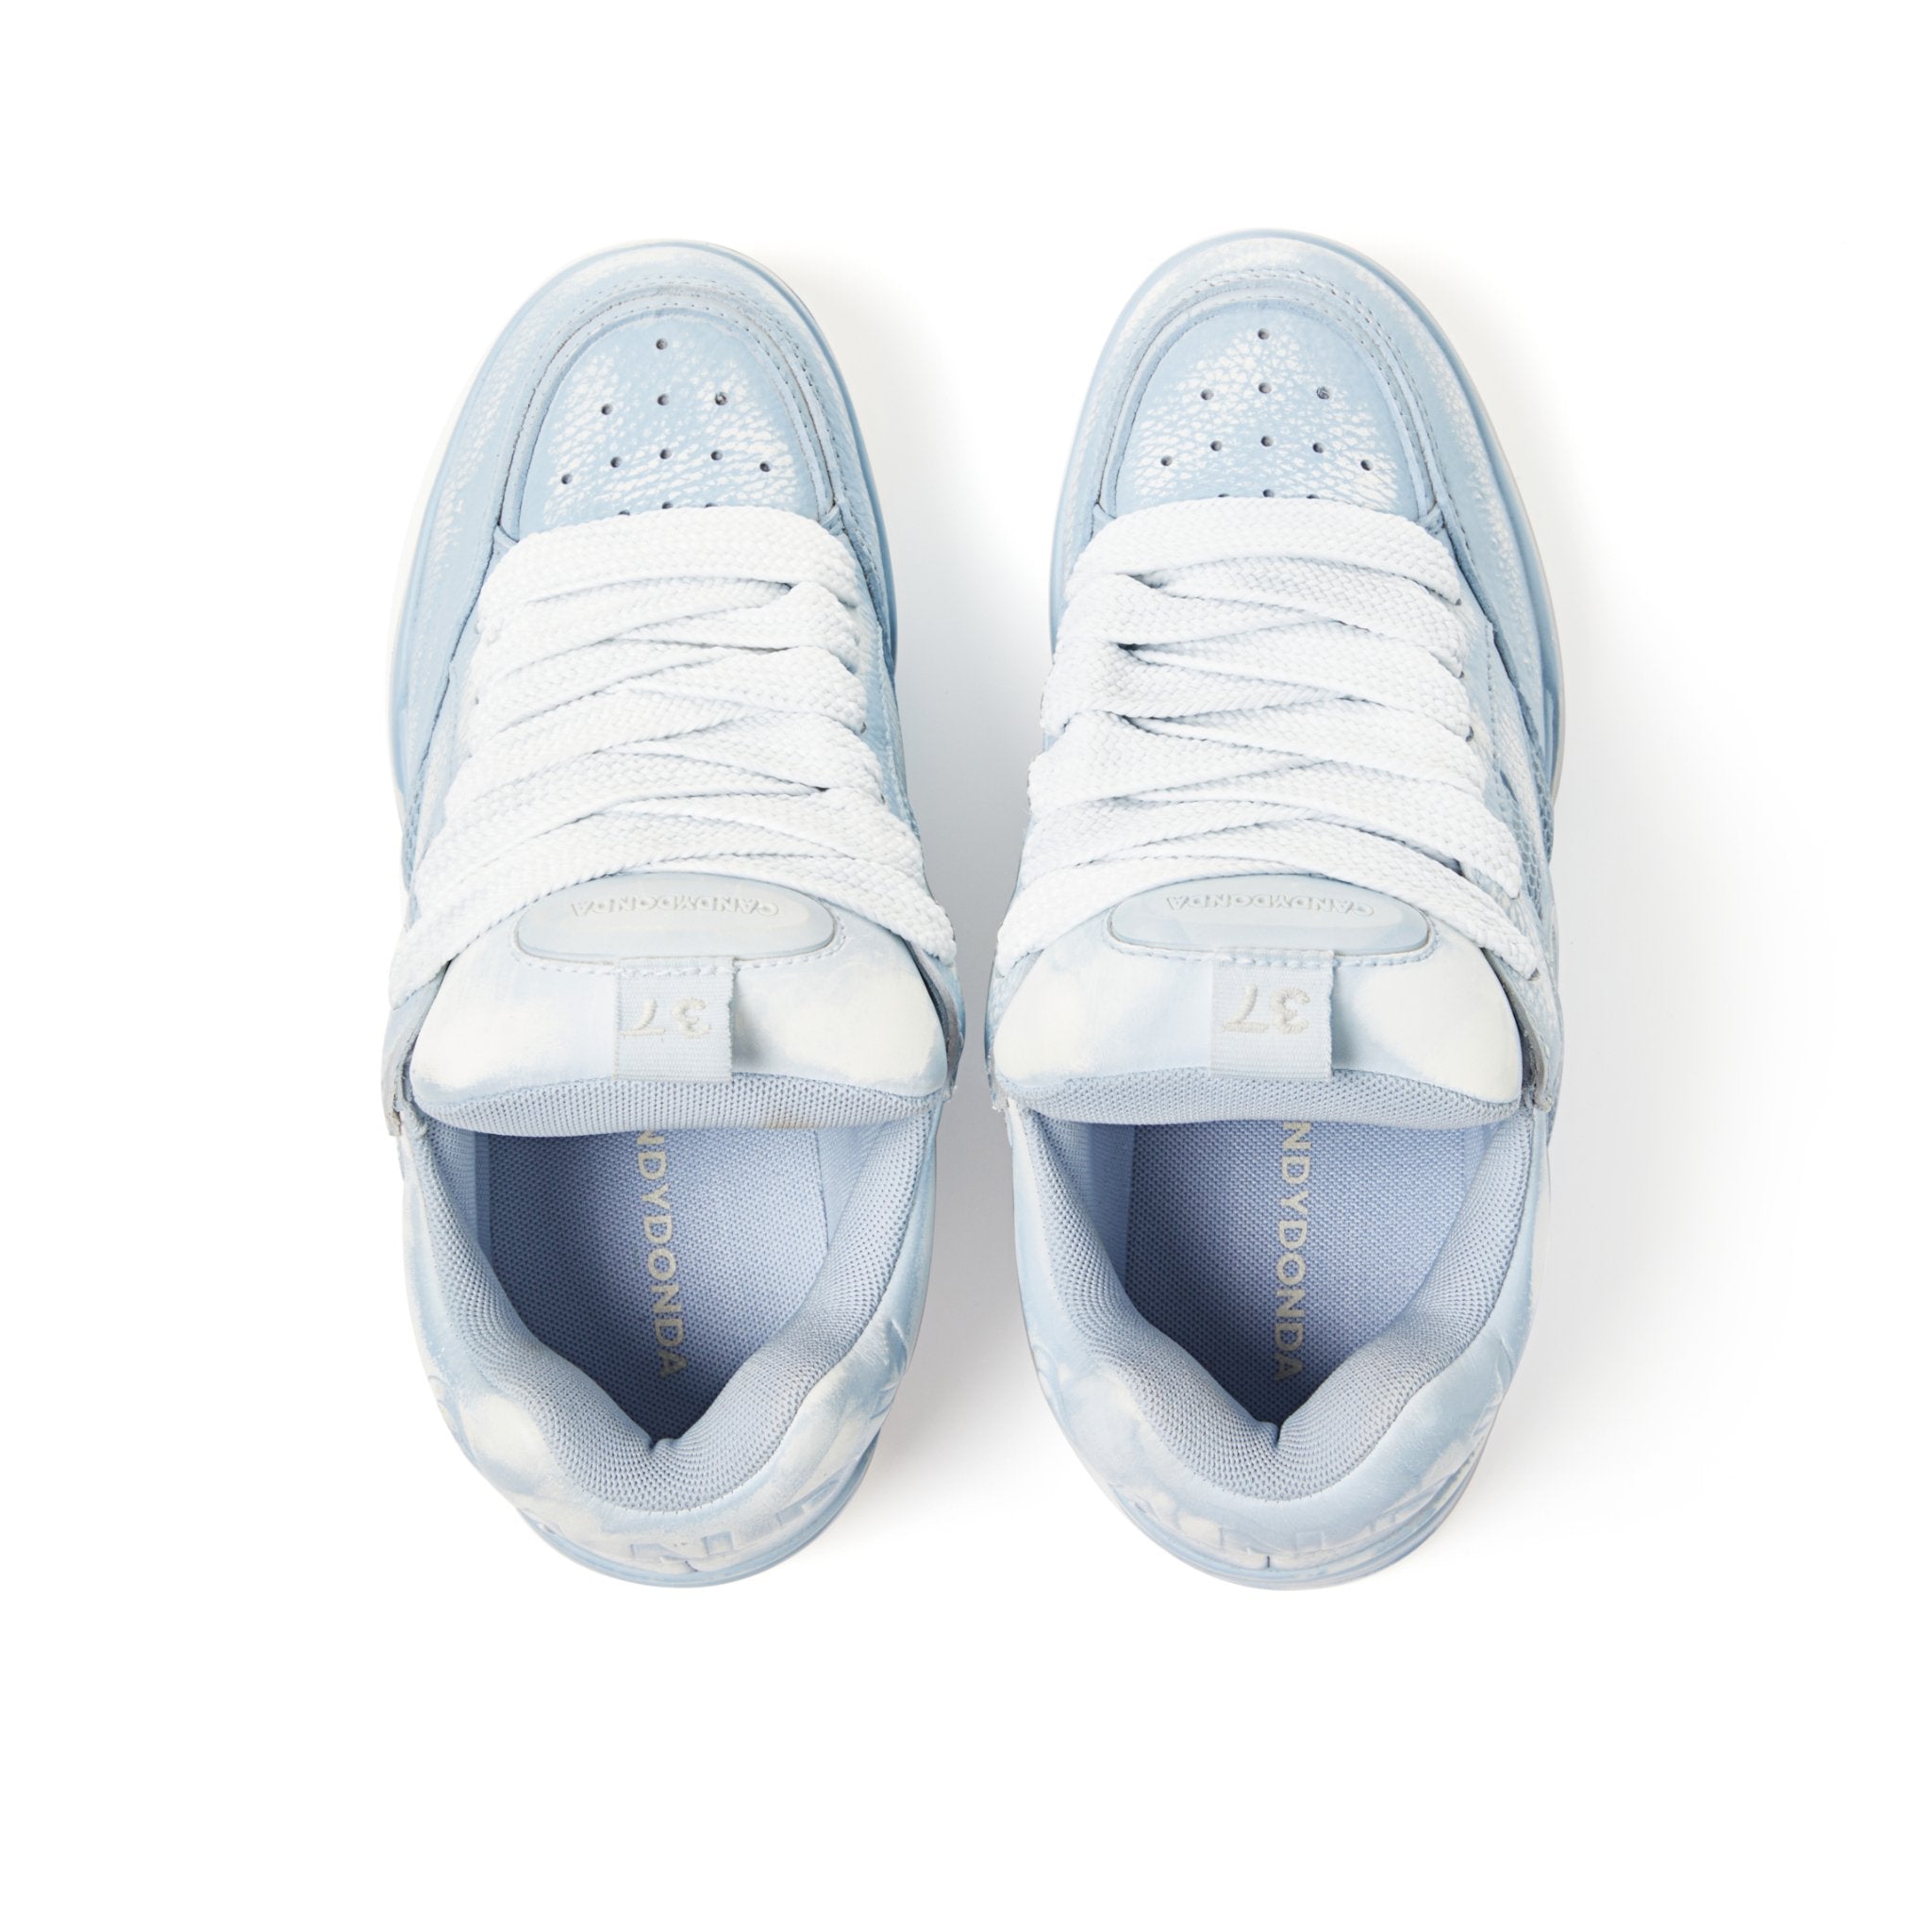 CANDYDONDA Washed Blue Curbmelo Sneaker | MADA IN CHINA